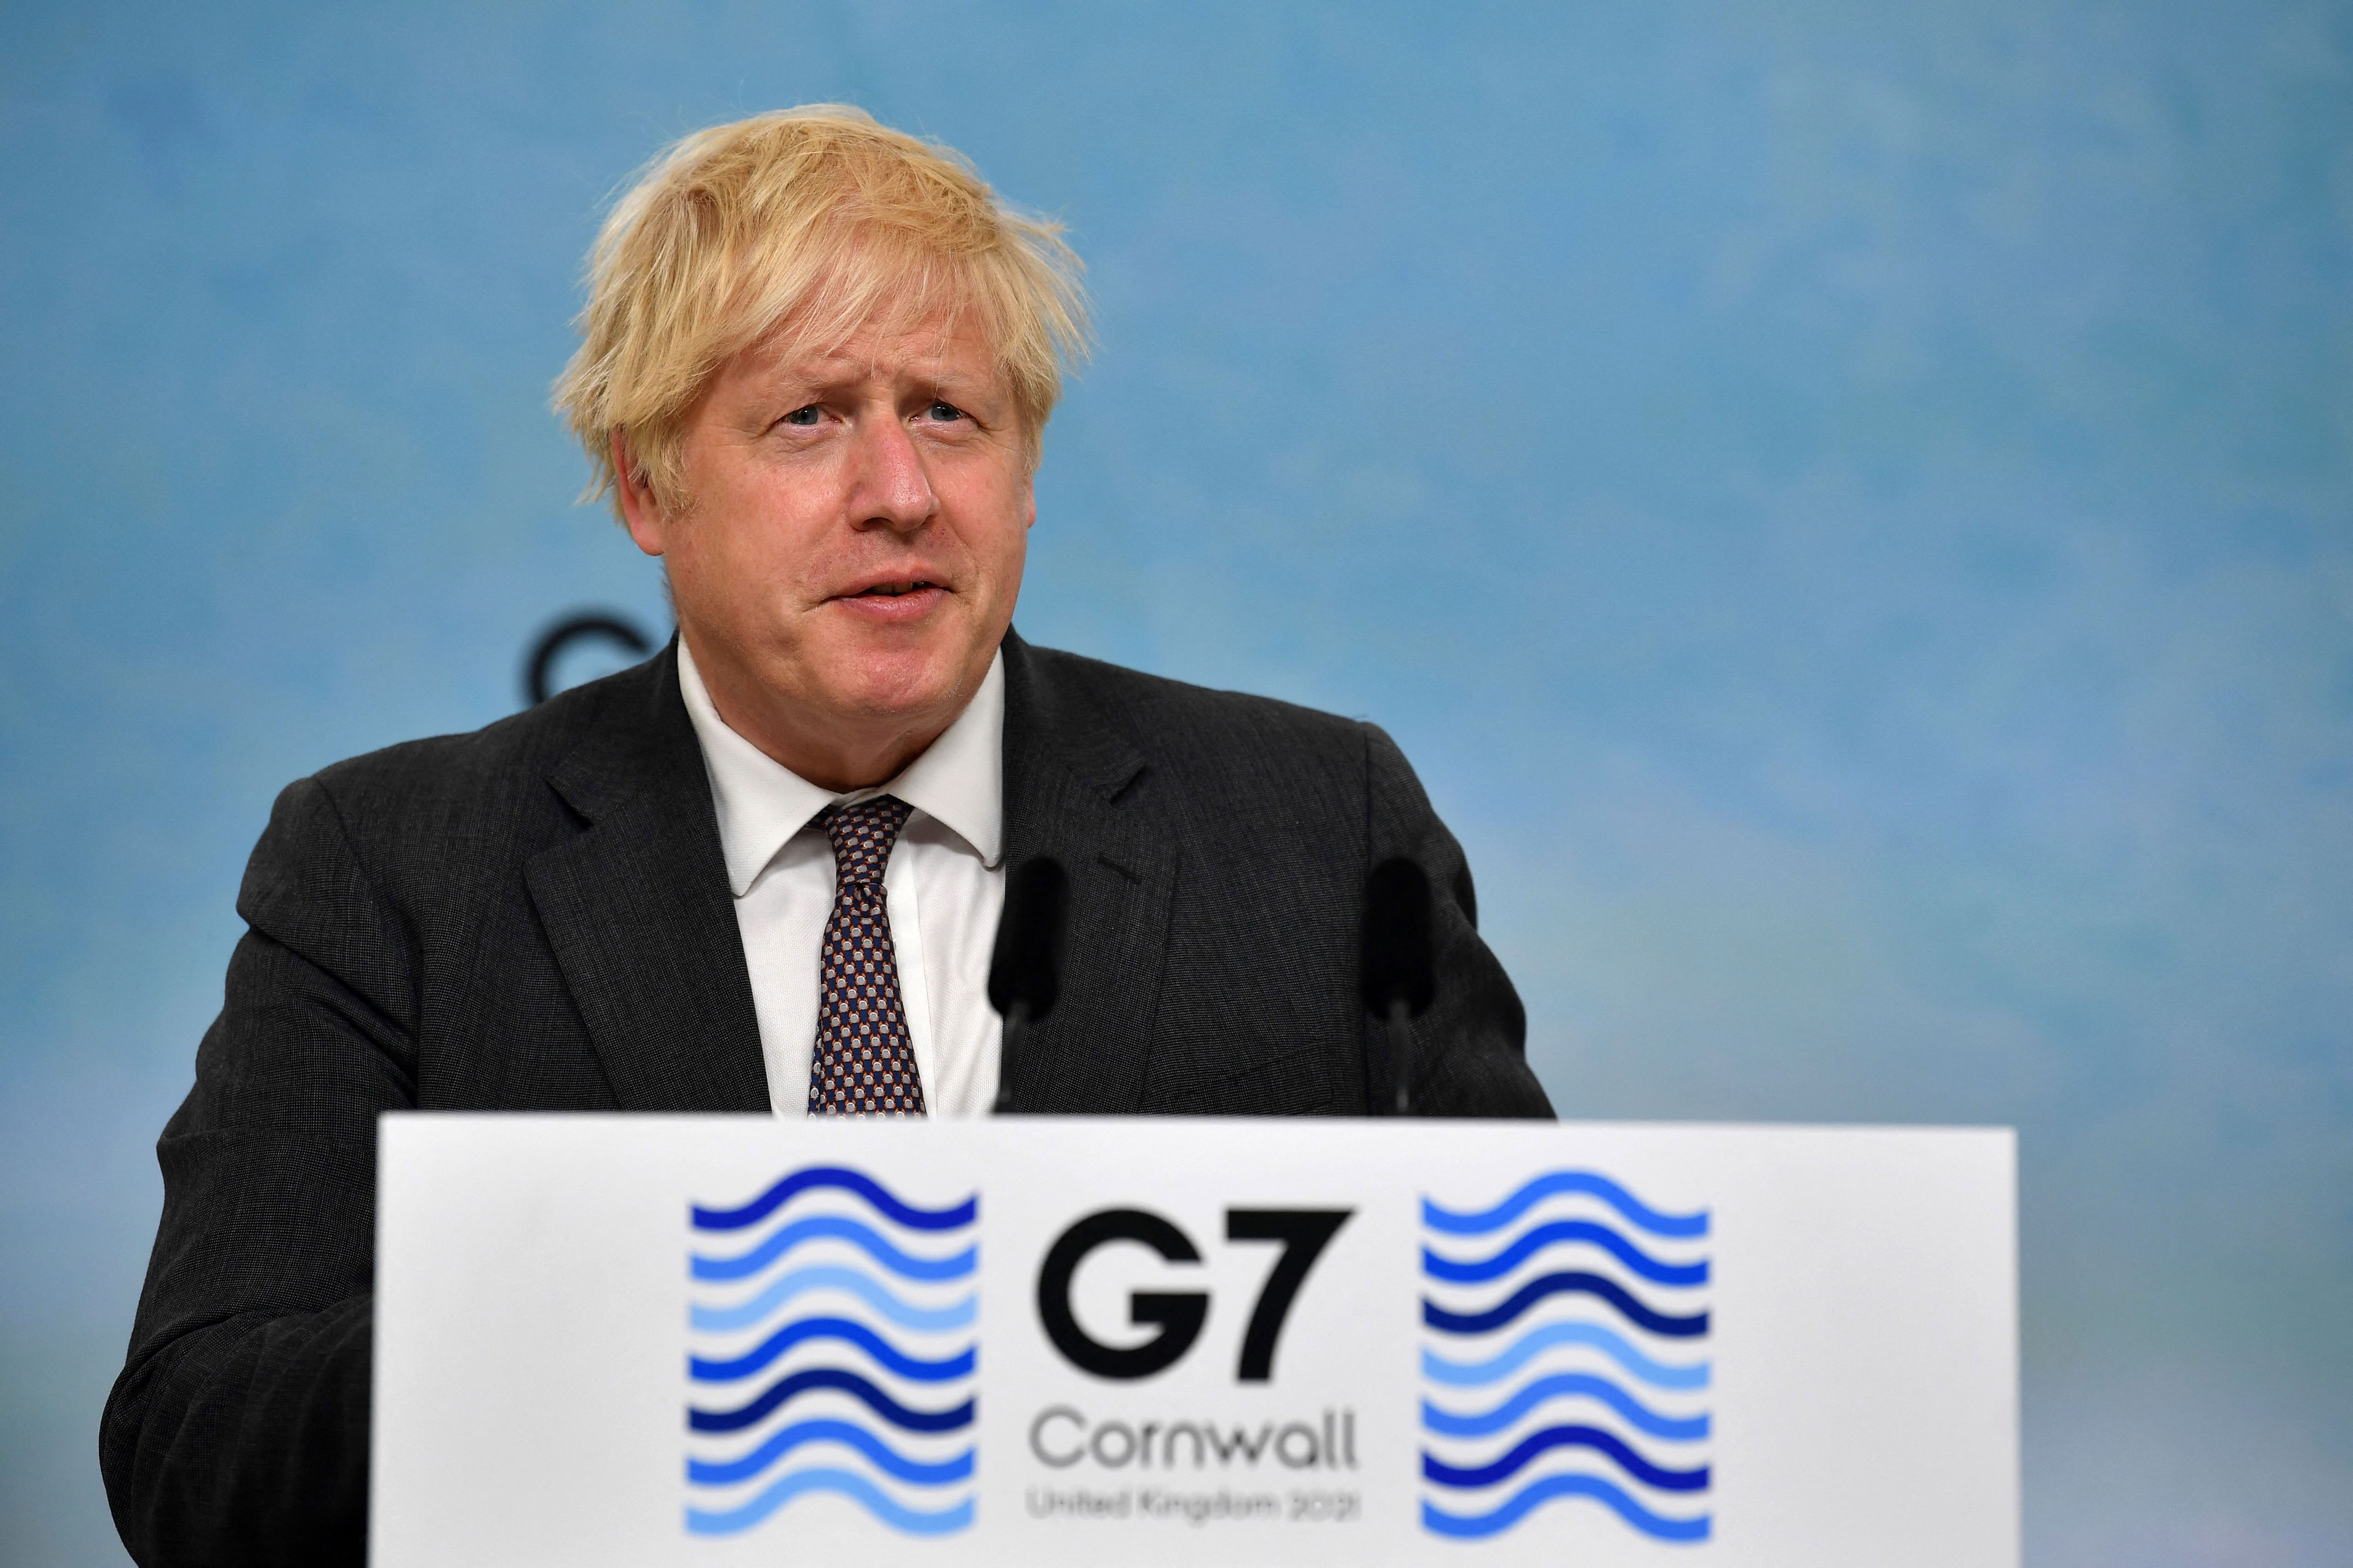 UK Prime Minister Boris Johnson speaks at a press conference at the G7 summit in Carbis Bay, England, on June 13.